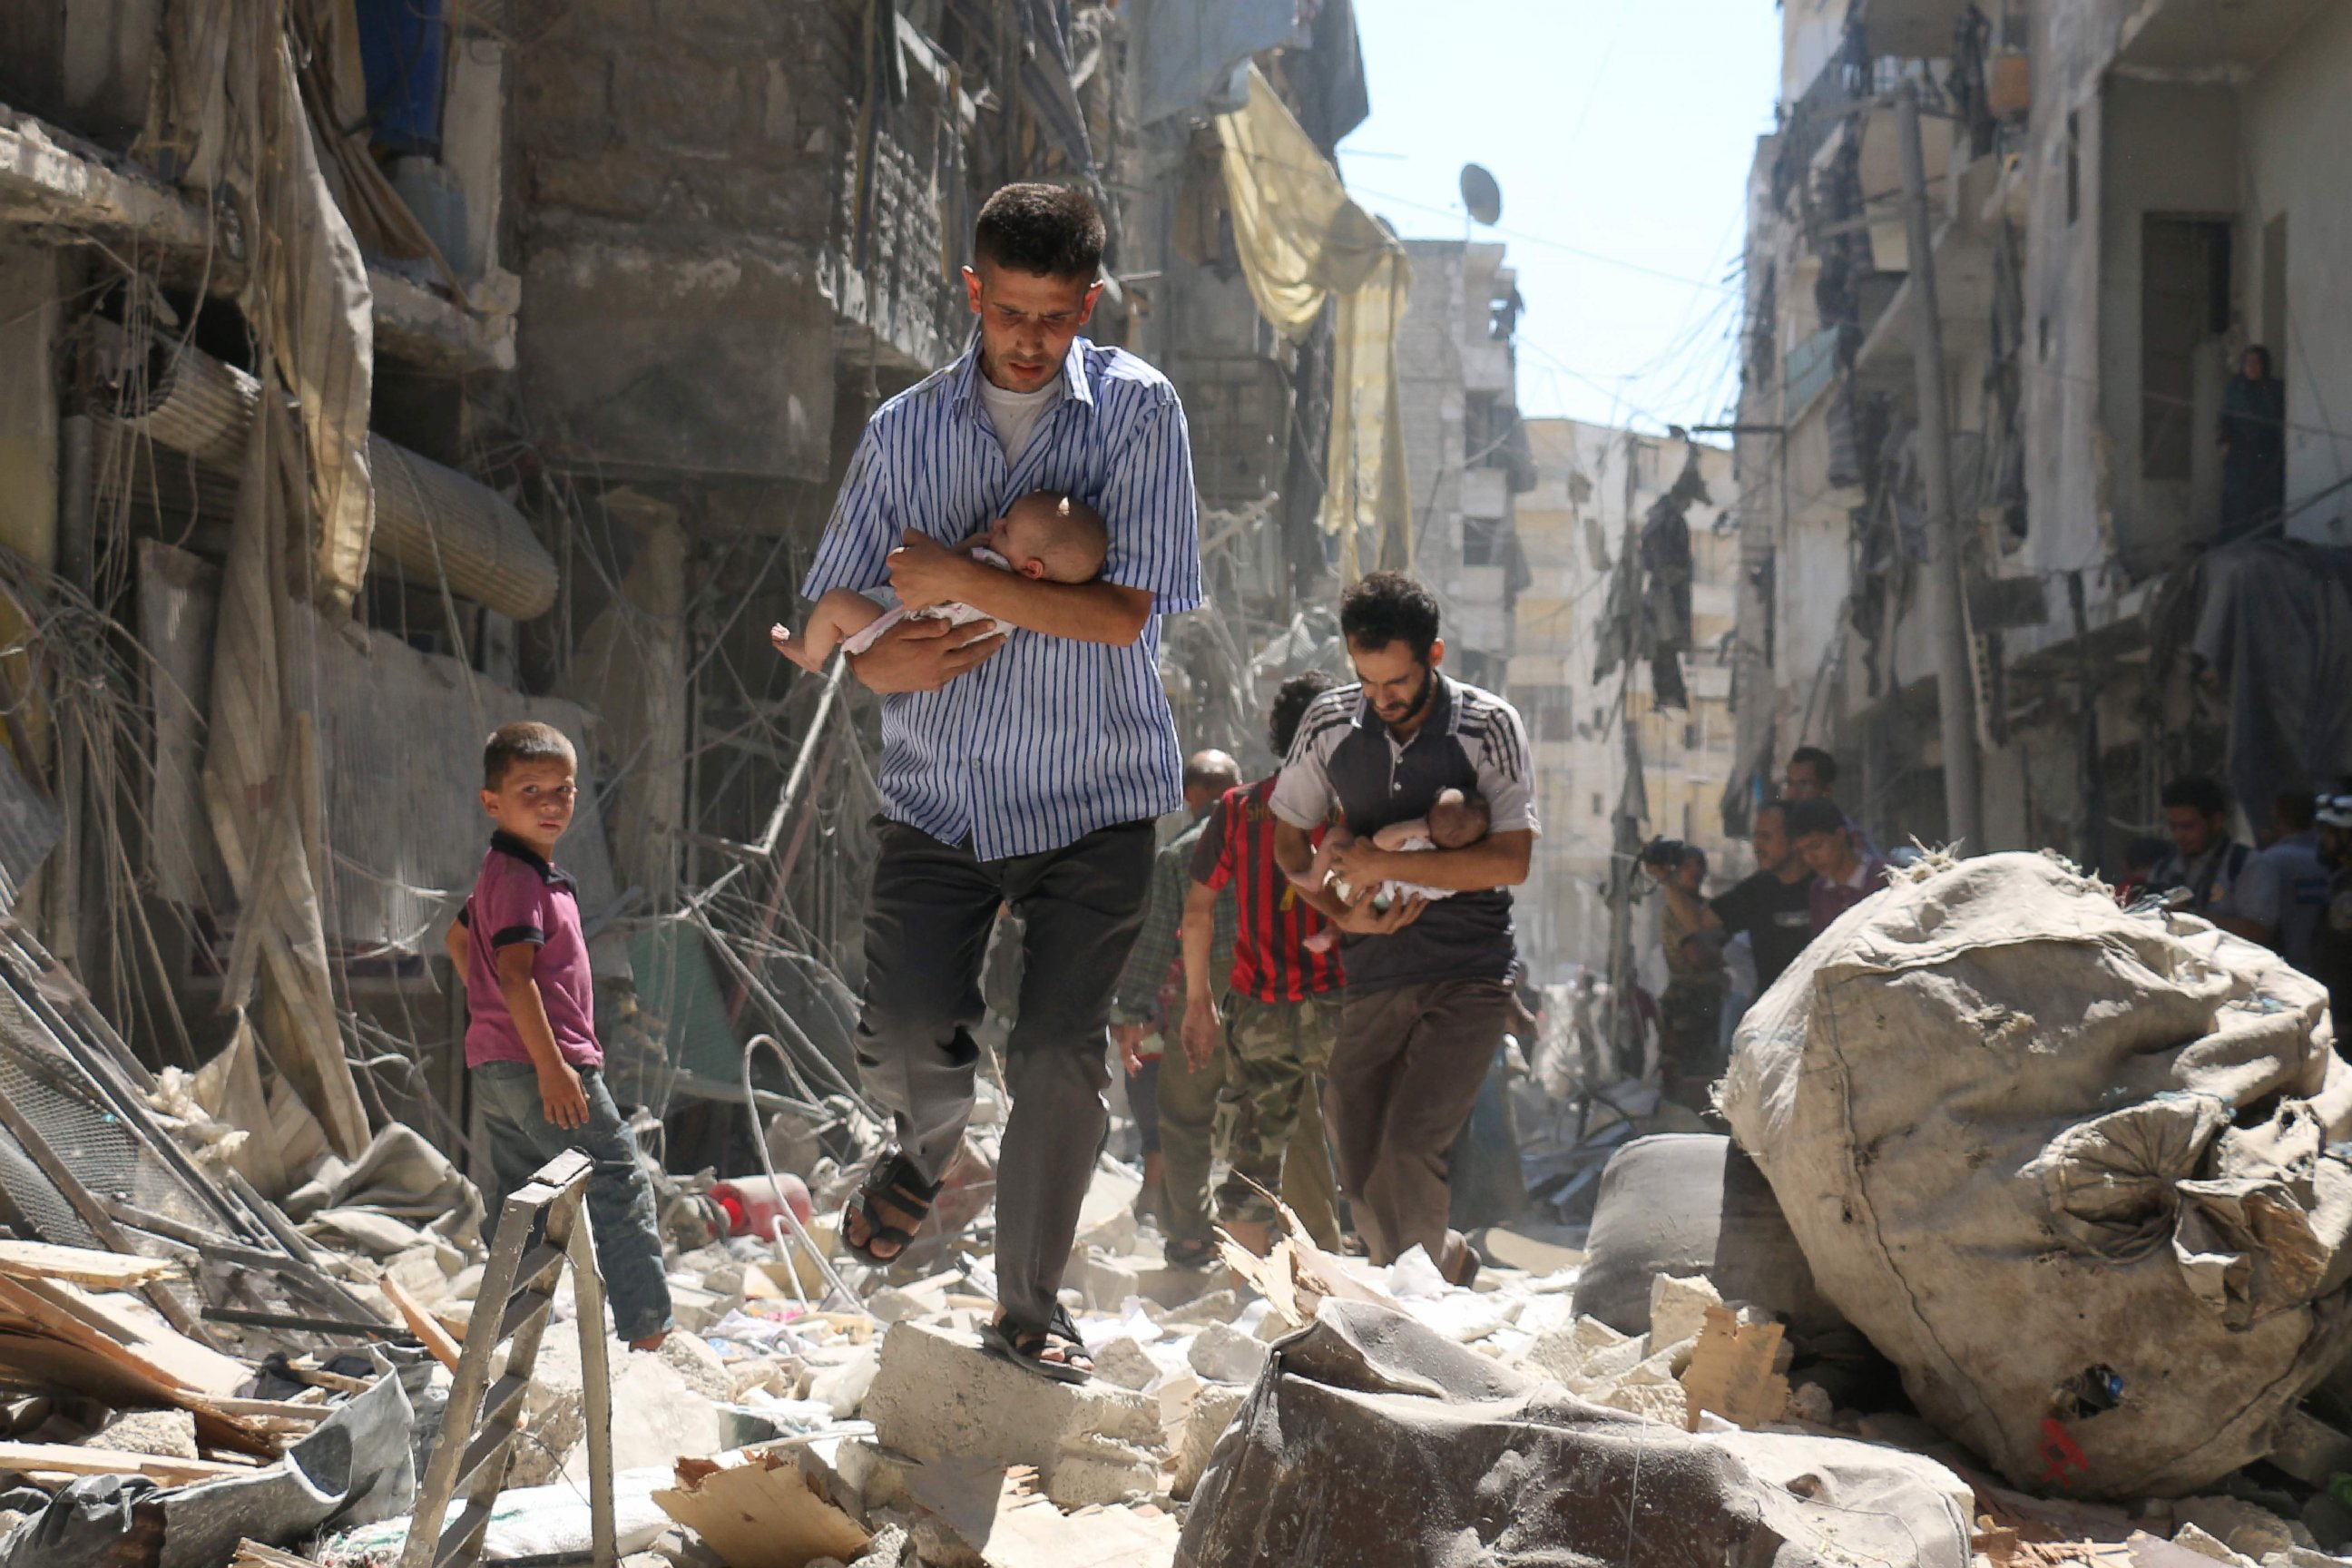 PHOTO: Syrian men carrying babies make their way through the rubble of destroyed buildings following a reported air strike on the rebel-held Salihin neighborhood of the northern city of Aleppo, Sept.  11, 2016.